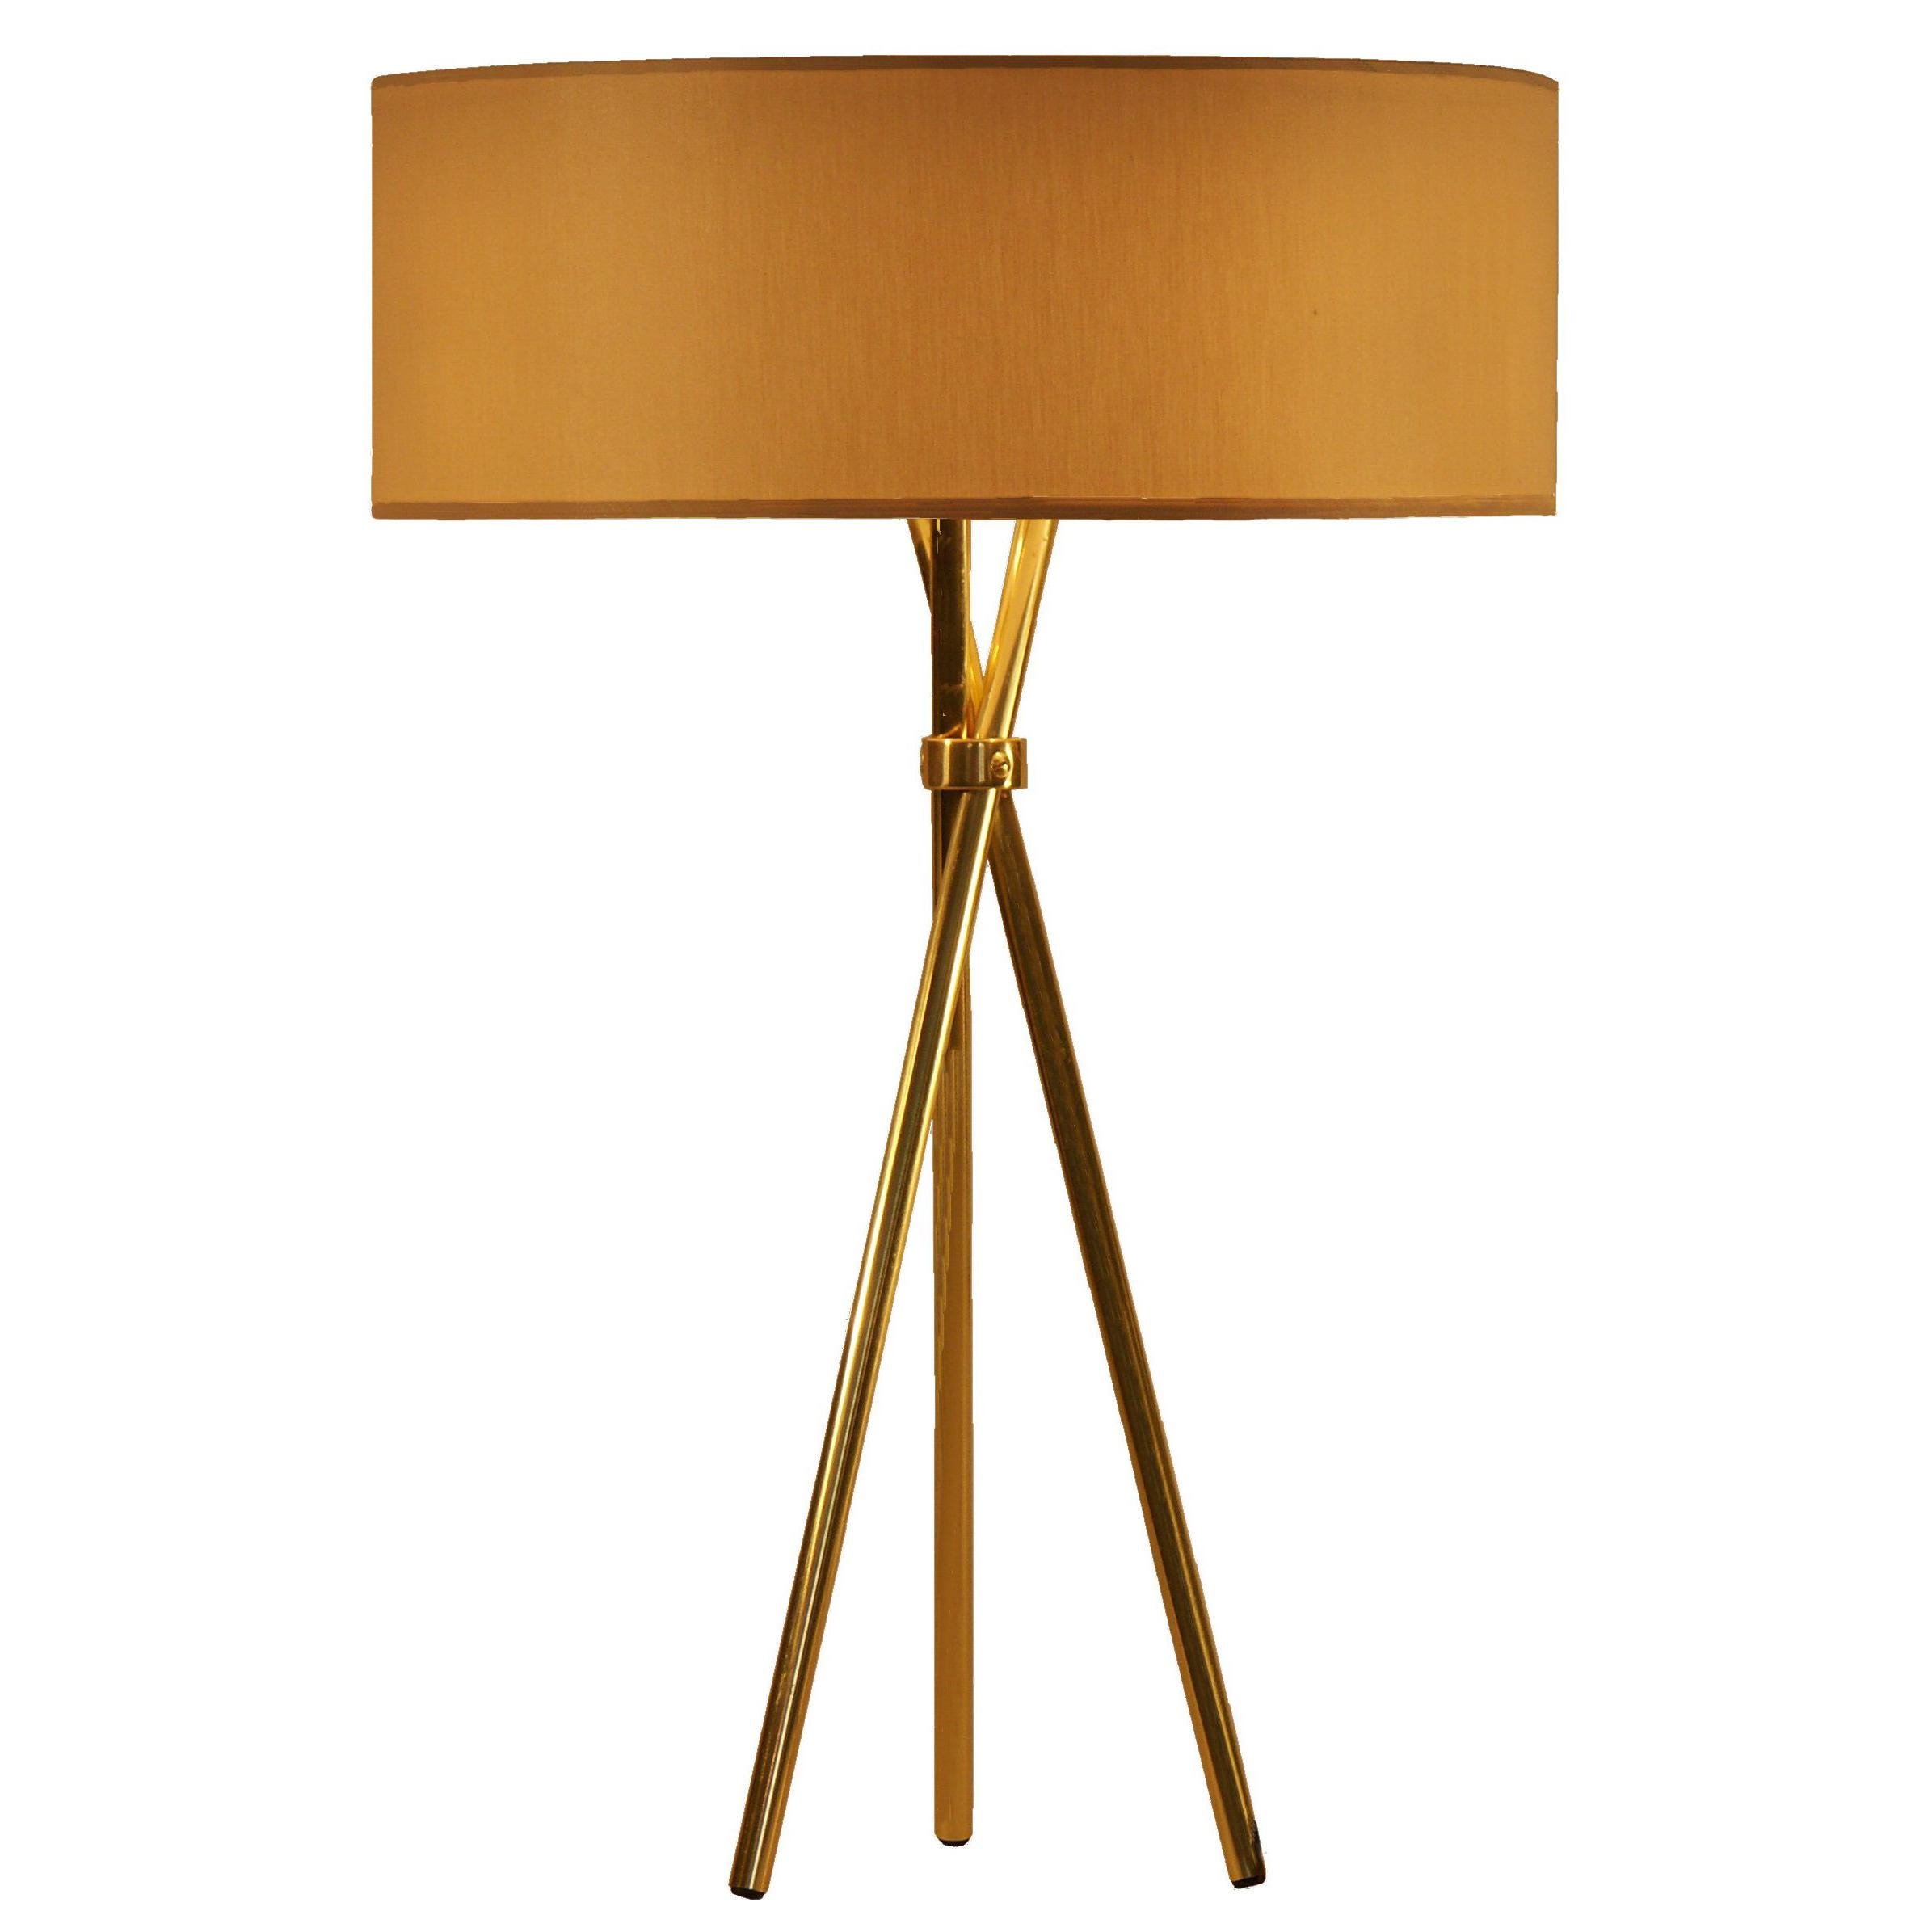 Quo Mini Cardboard and Brass Table Lamp, Diff. Colors Available